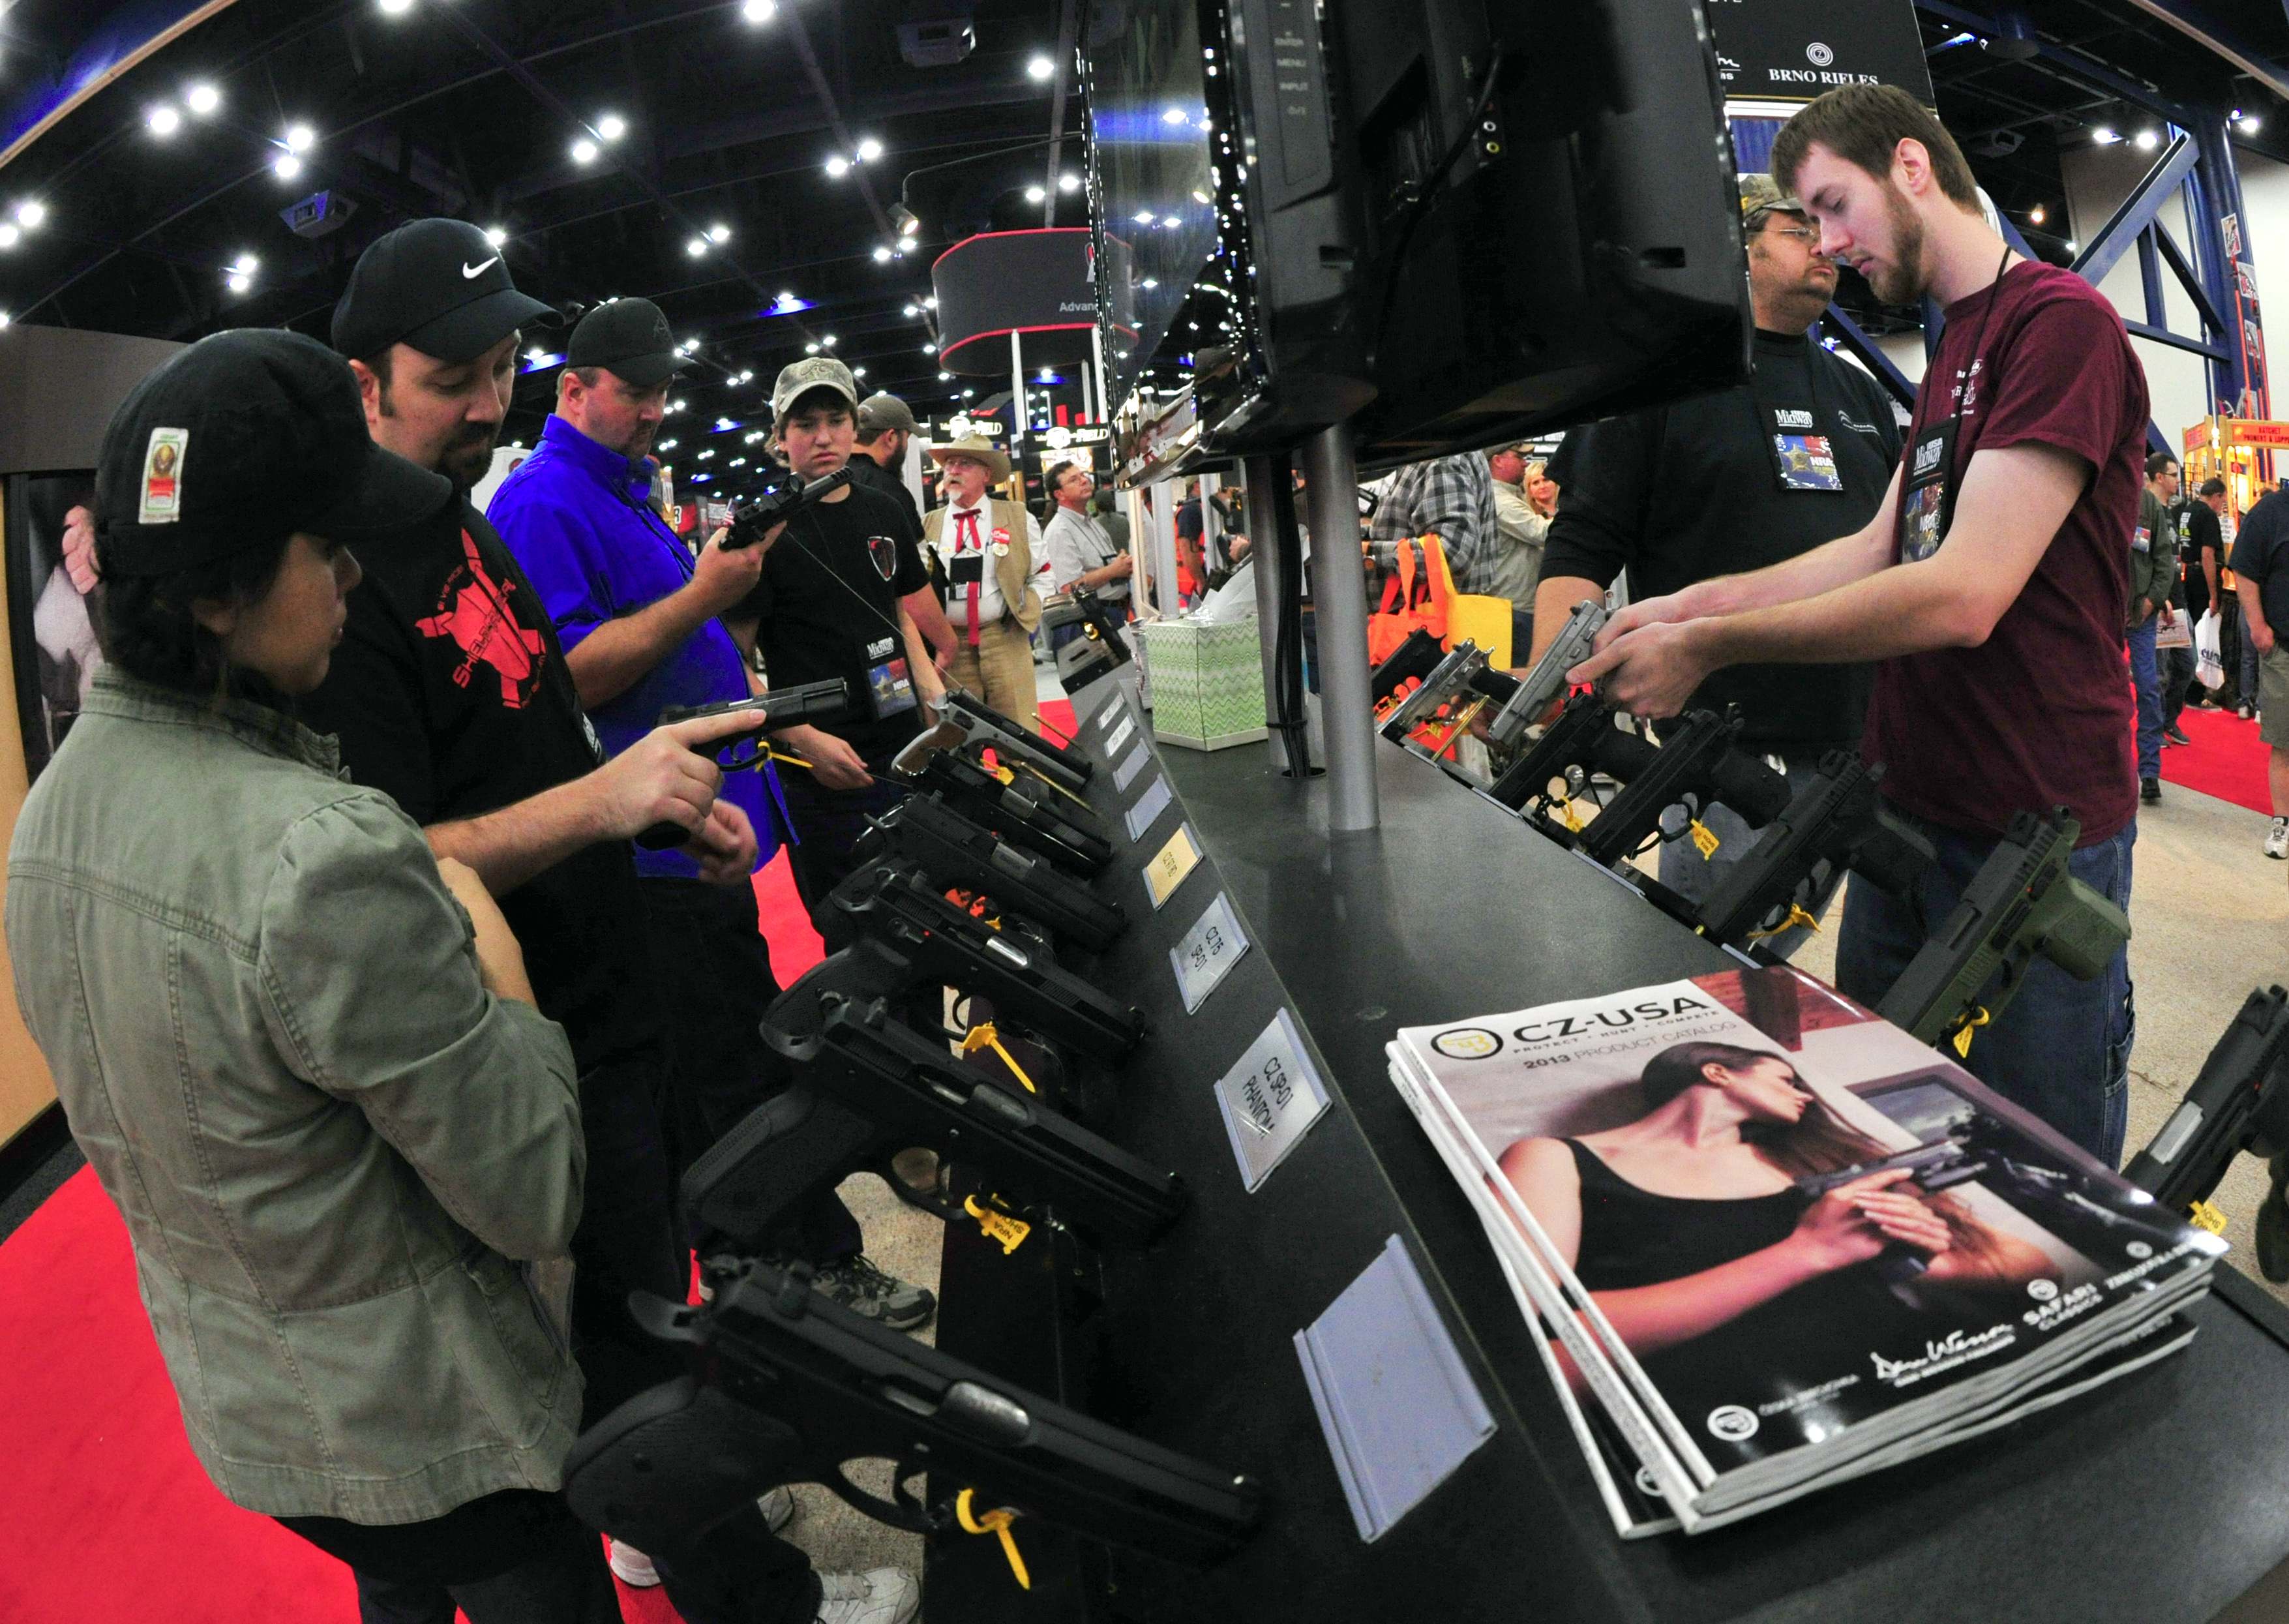 Convention goers look at handguns at the CZ-USA booth at the NRA(National Rifle Association) Convention May 4, 2013 in Houston, Texas.(Photo by KAREN BLEIER/AFP/Getty Images)